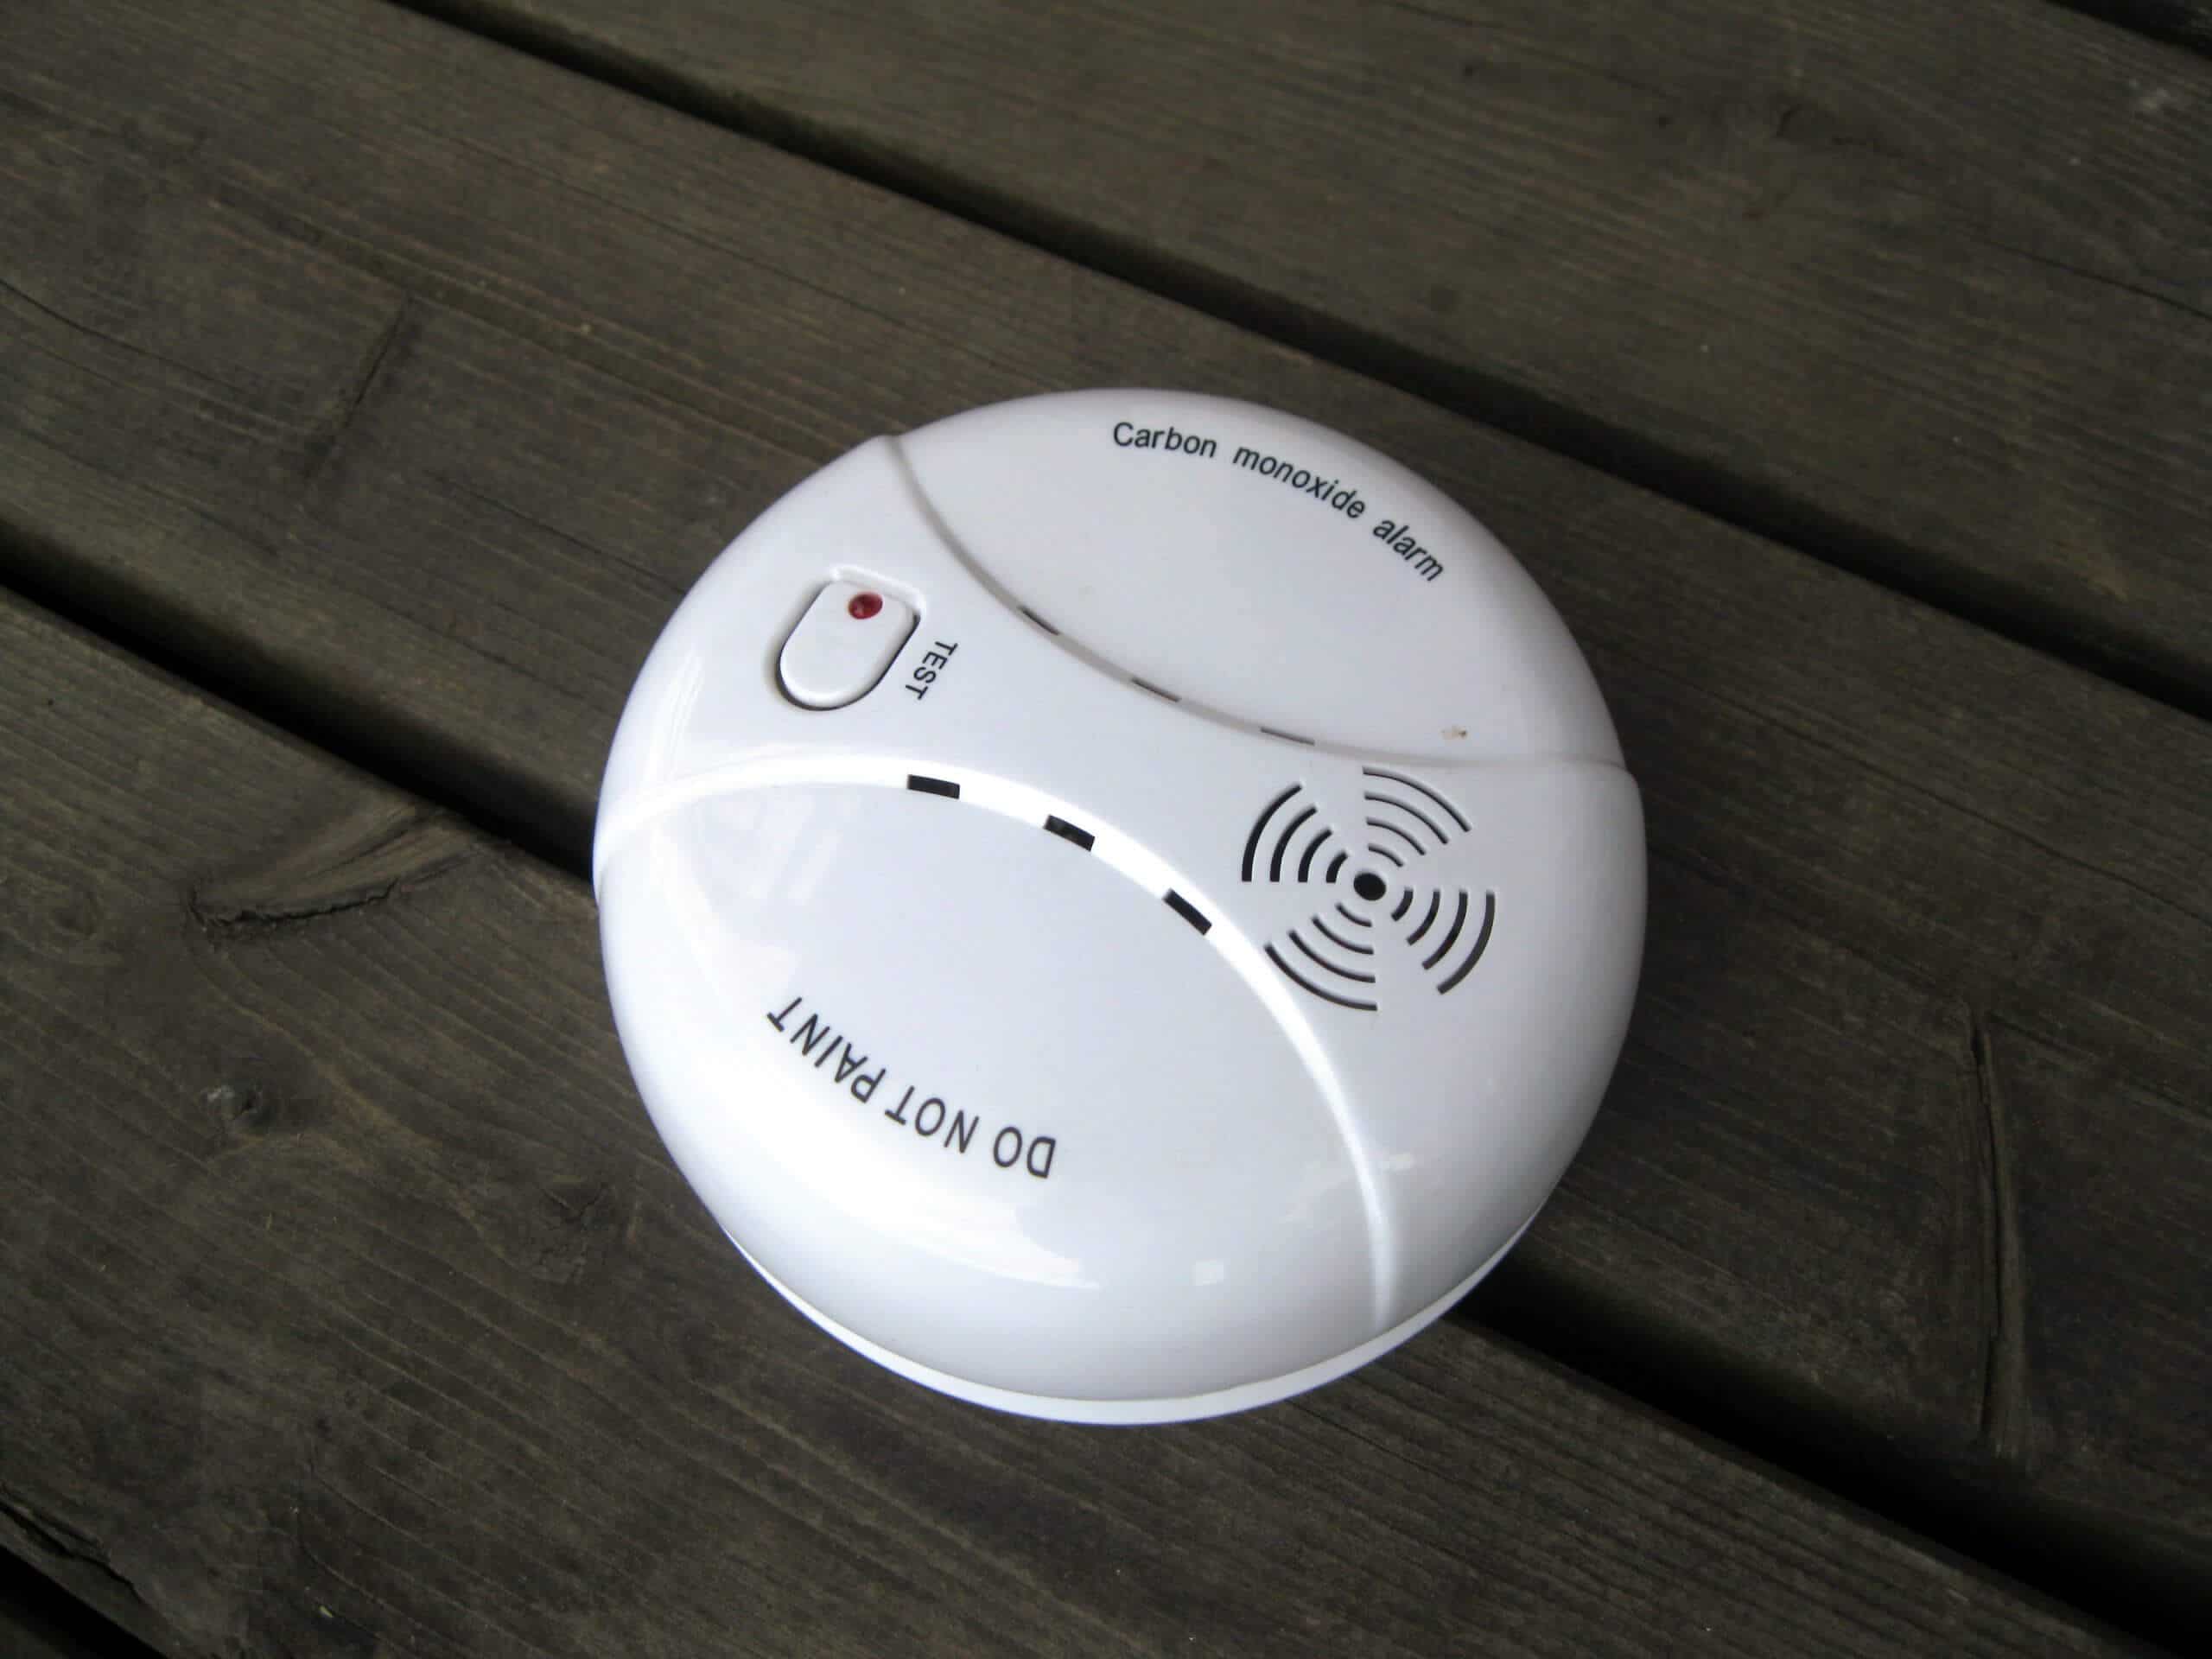 What is the best location for carbon monoxide detector